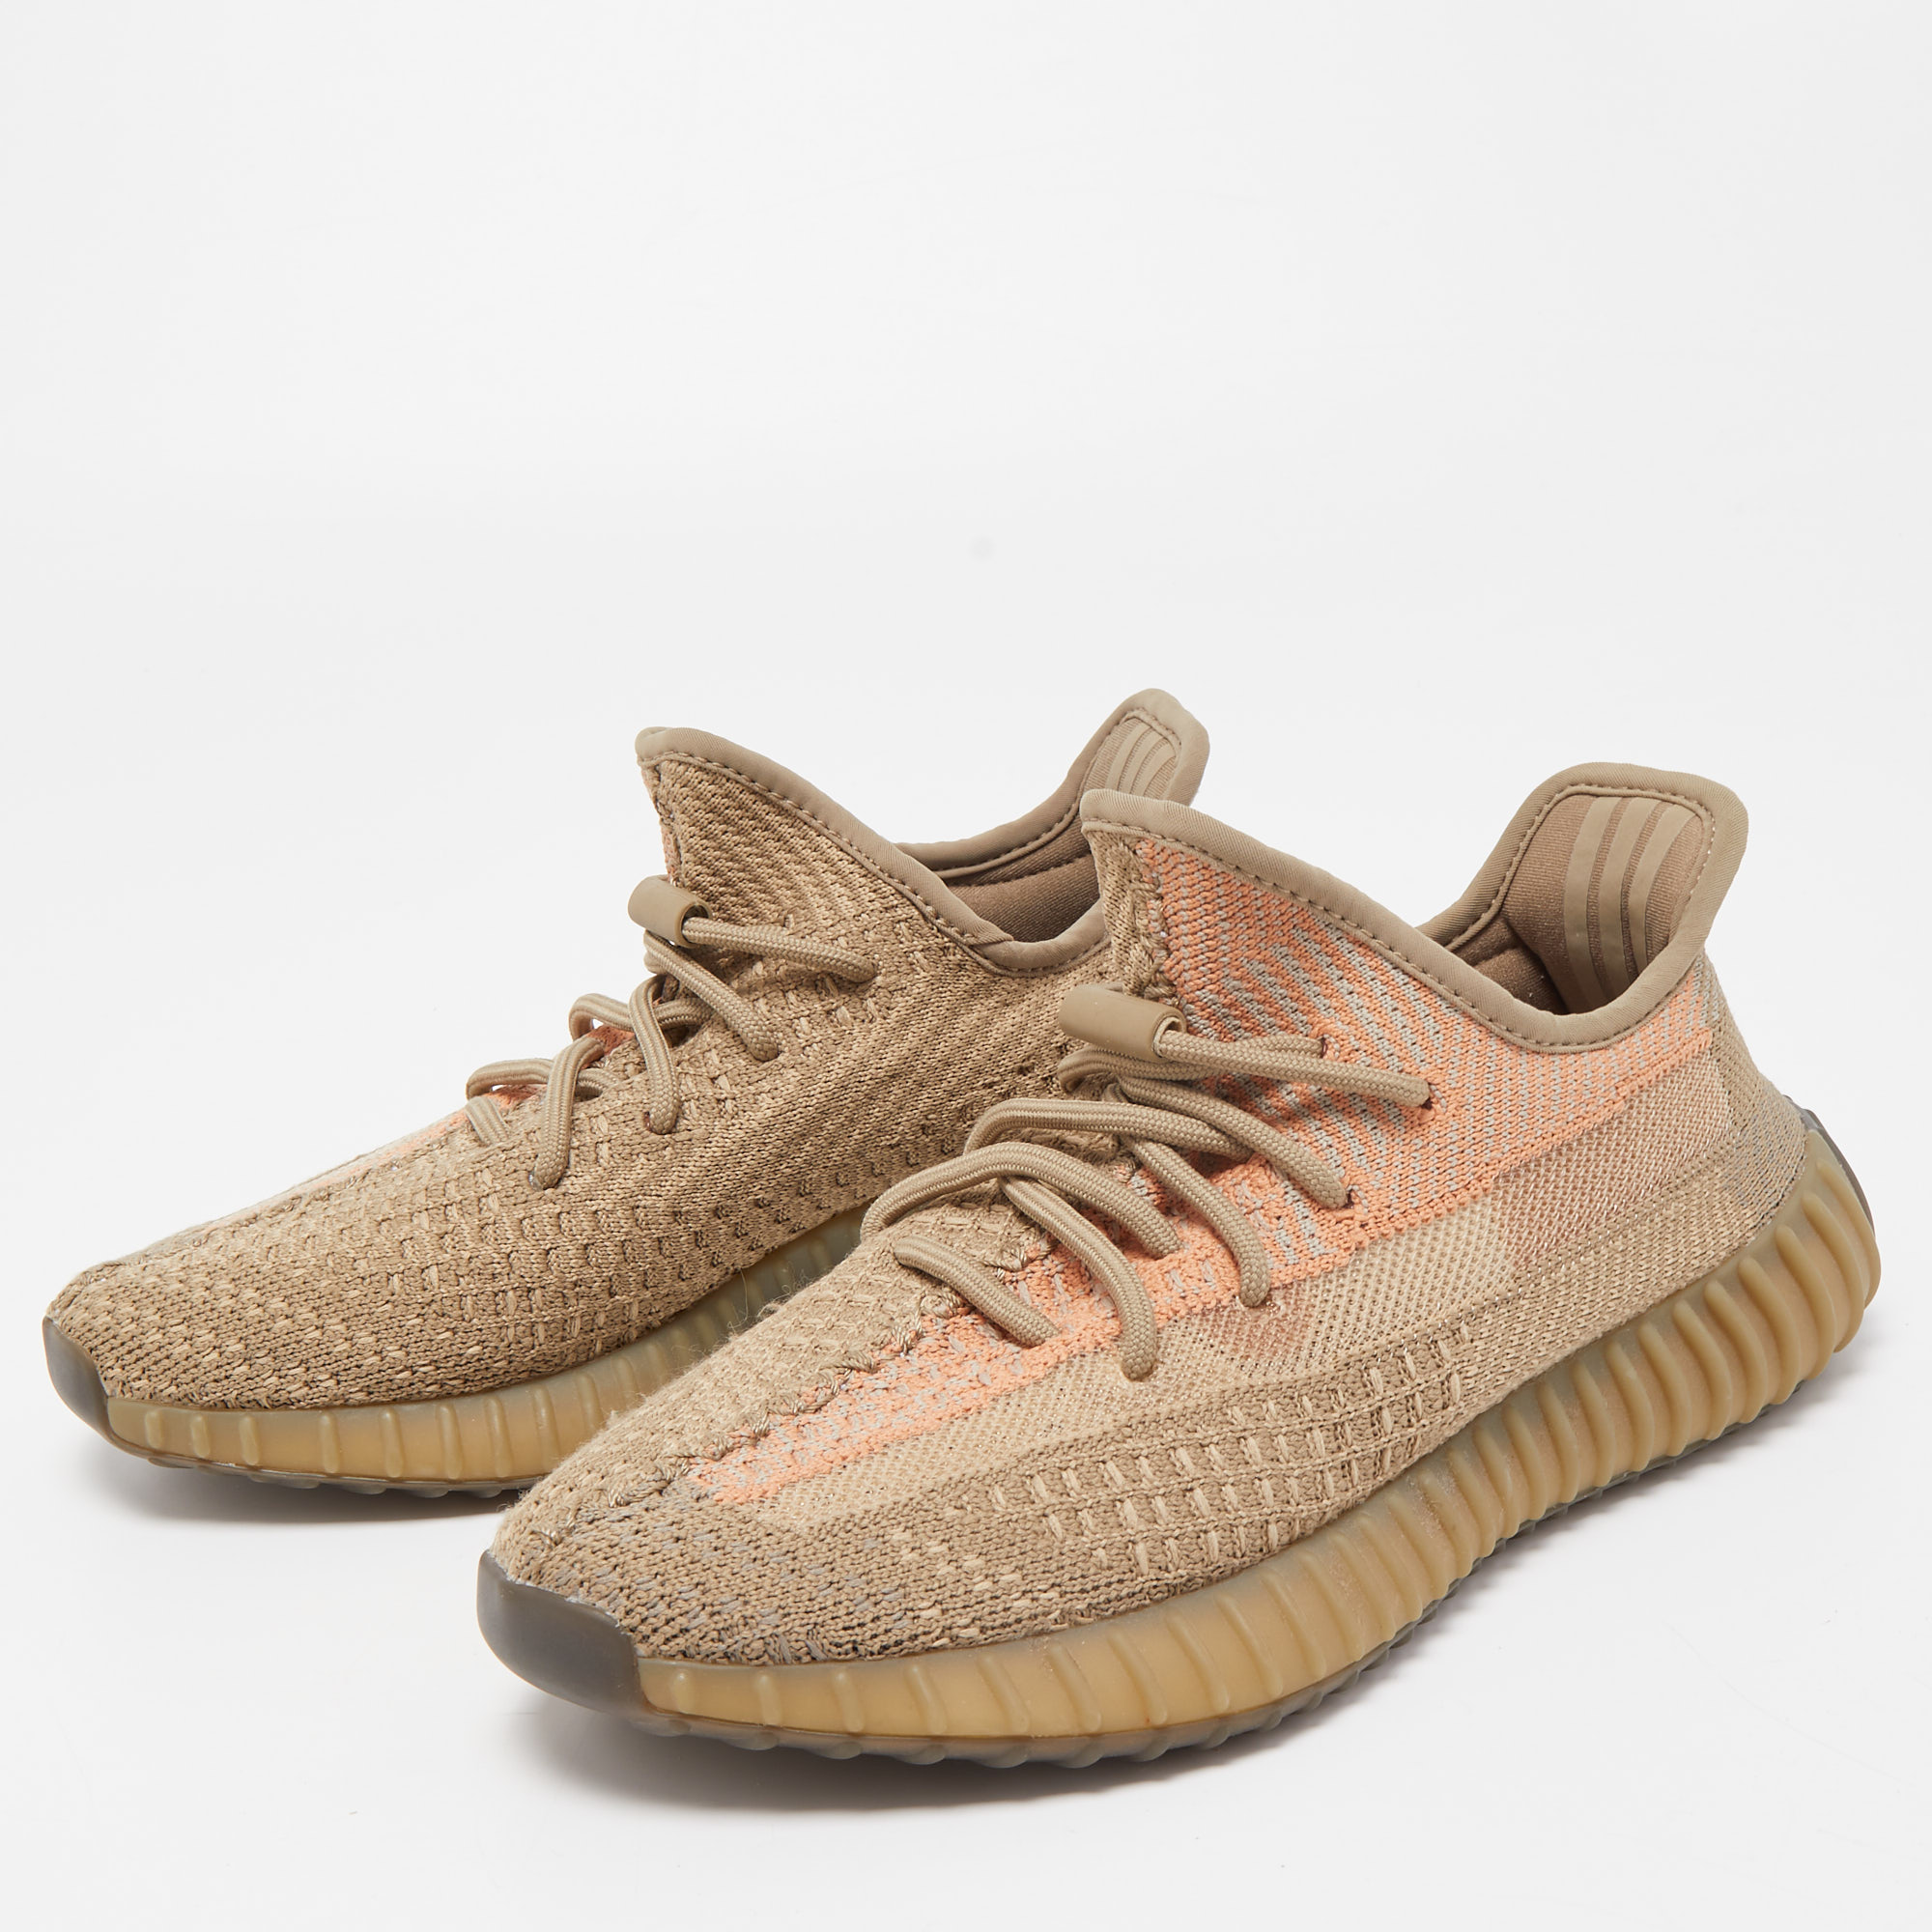 

Yeezy x Adidas Brown Knit Fabric Boost 350 V2 Sand Taupe Sneakers Size 38 2/3